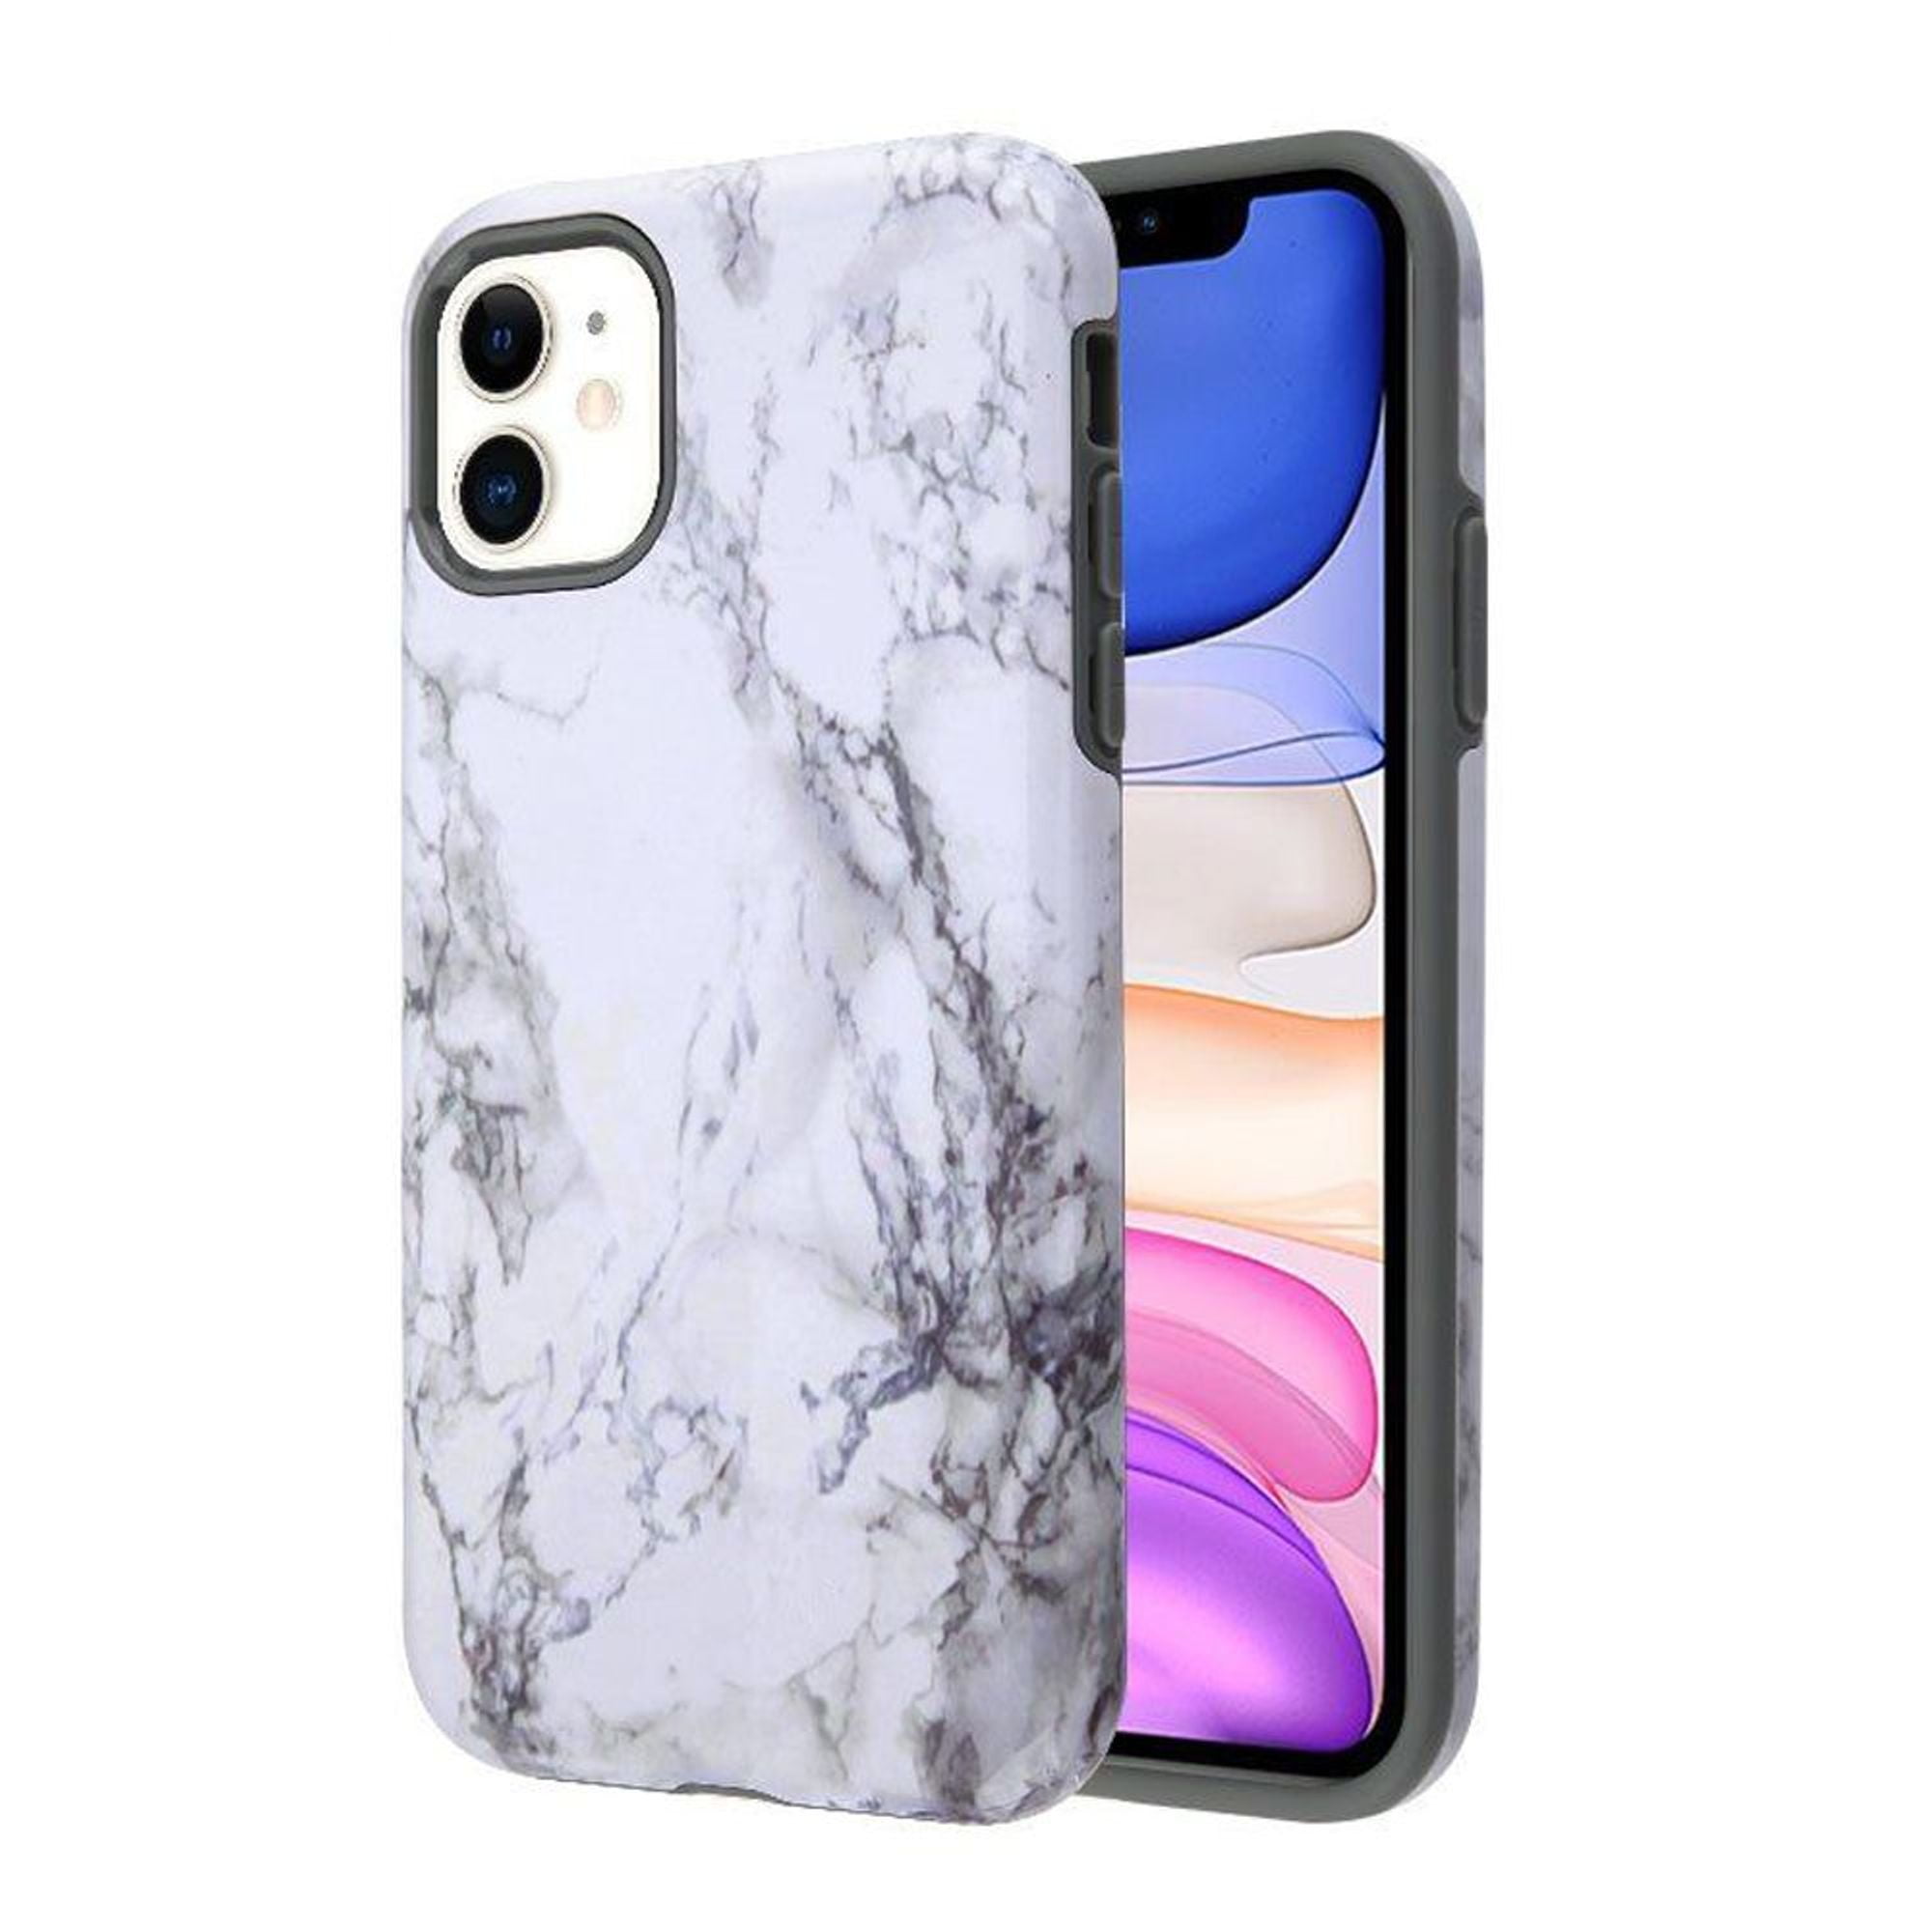 Apple iPhone 11 Case, by Insten Fuse Marble Dual Layer Hybrid PC/TPU